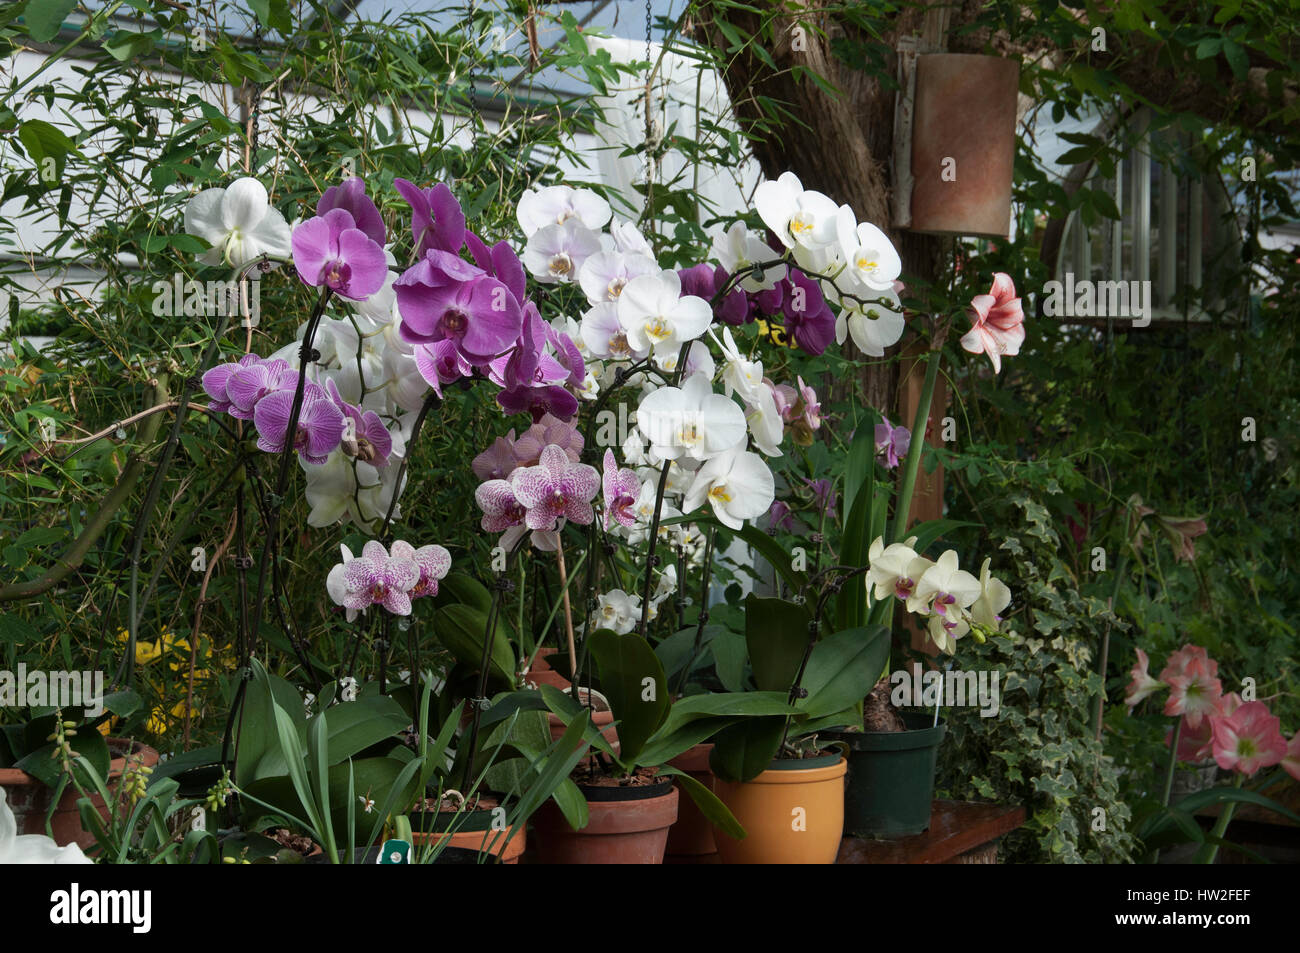 Display of phalaenopsis or moth Orchids Stock Photo